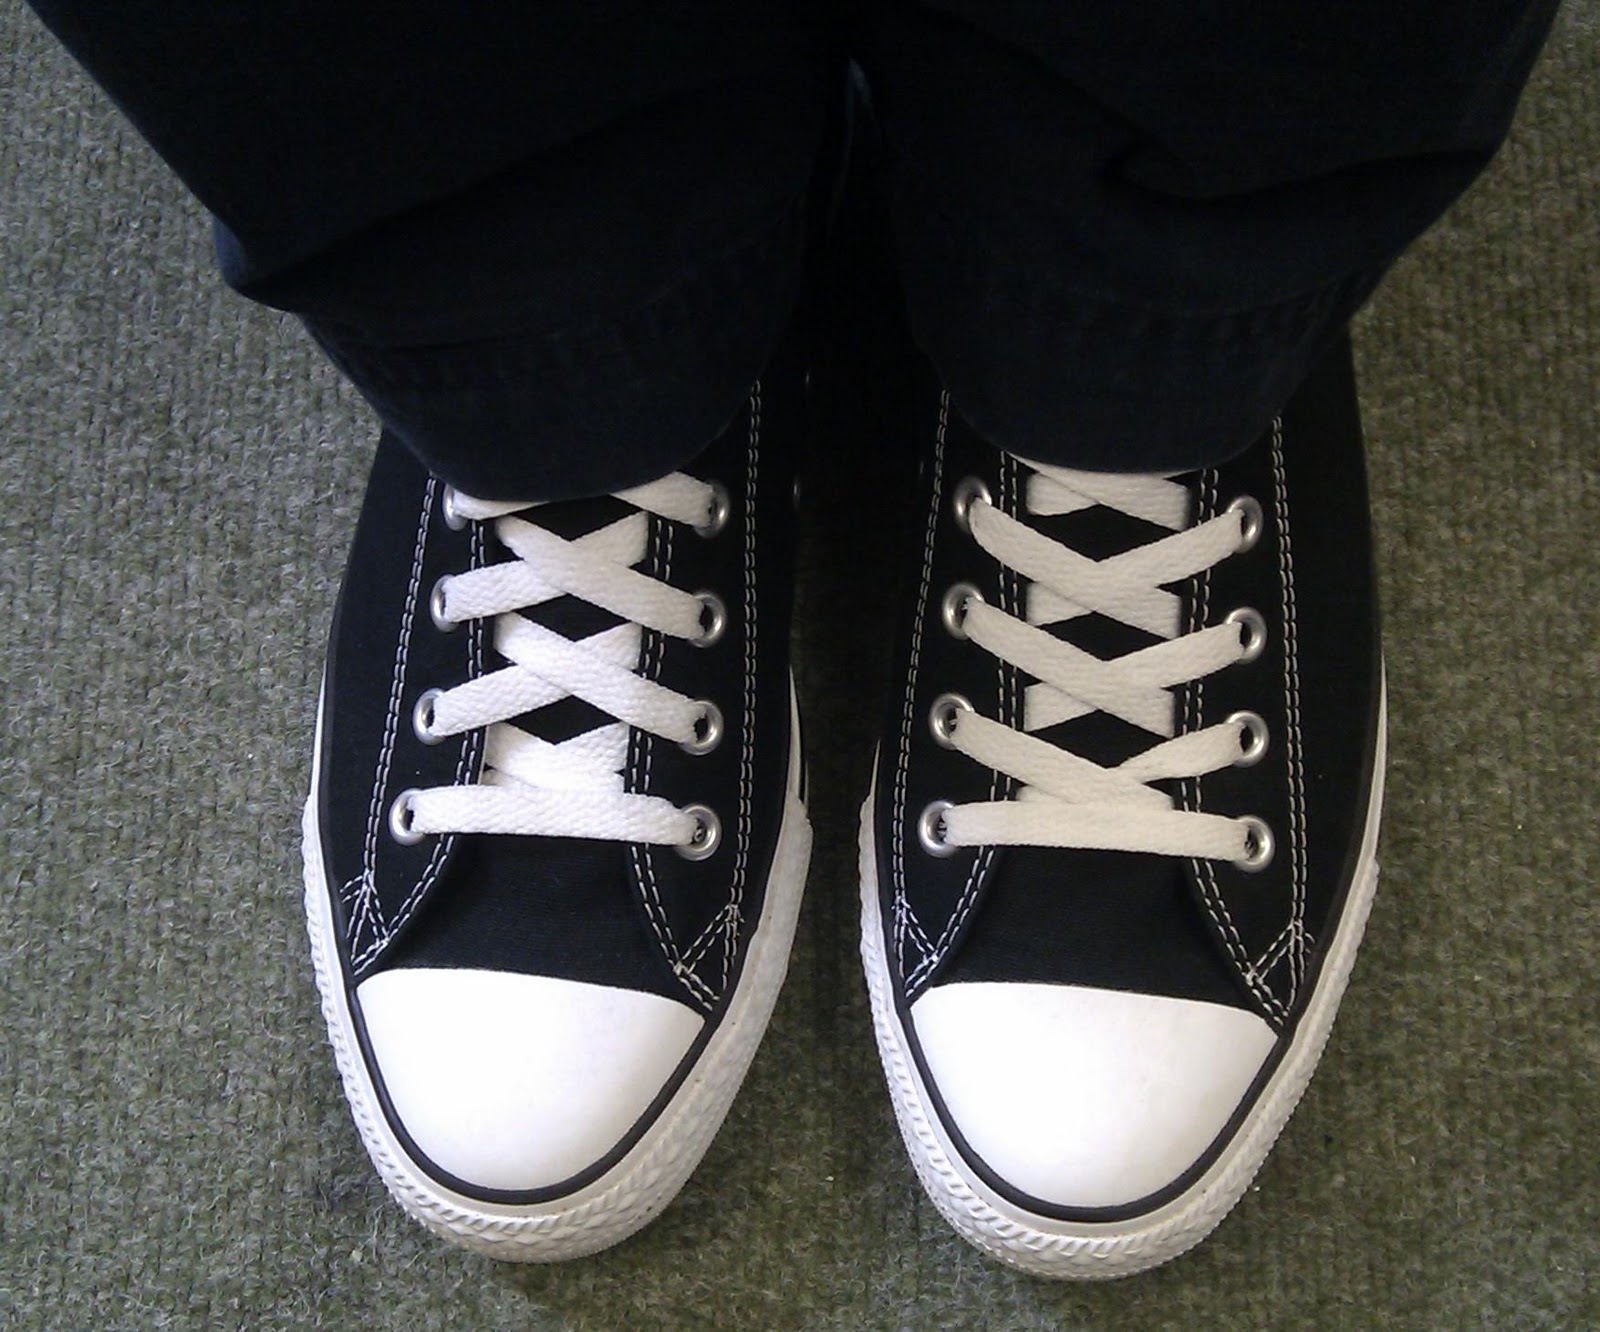 Blogging In My Wellies: Wearing my tall converse